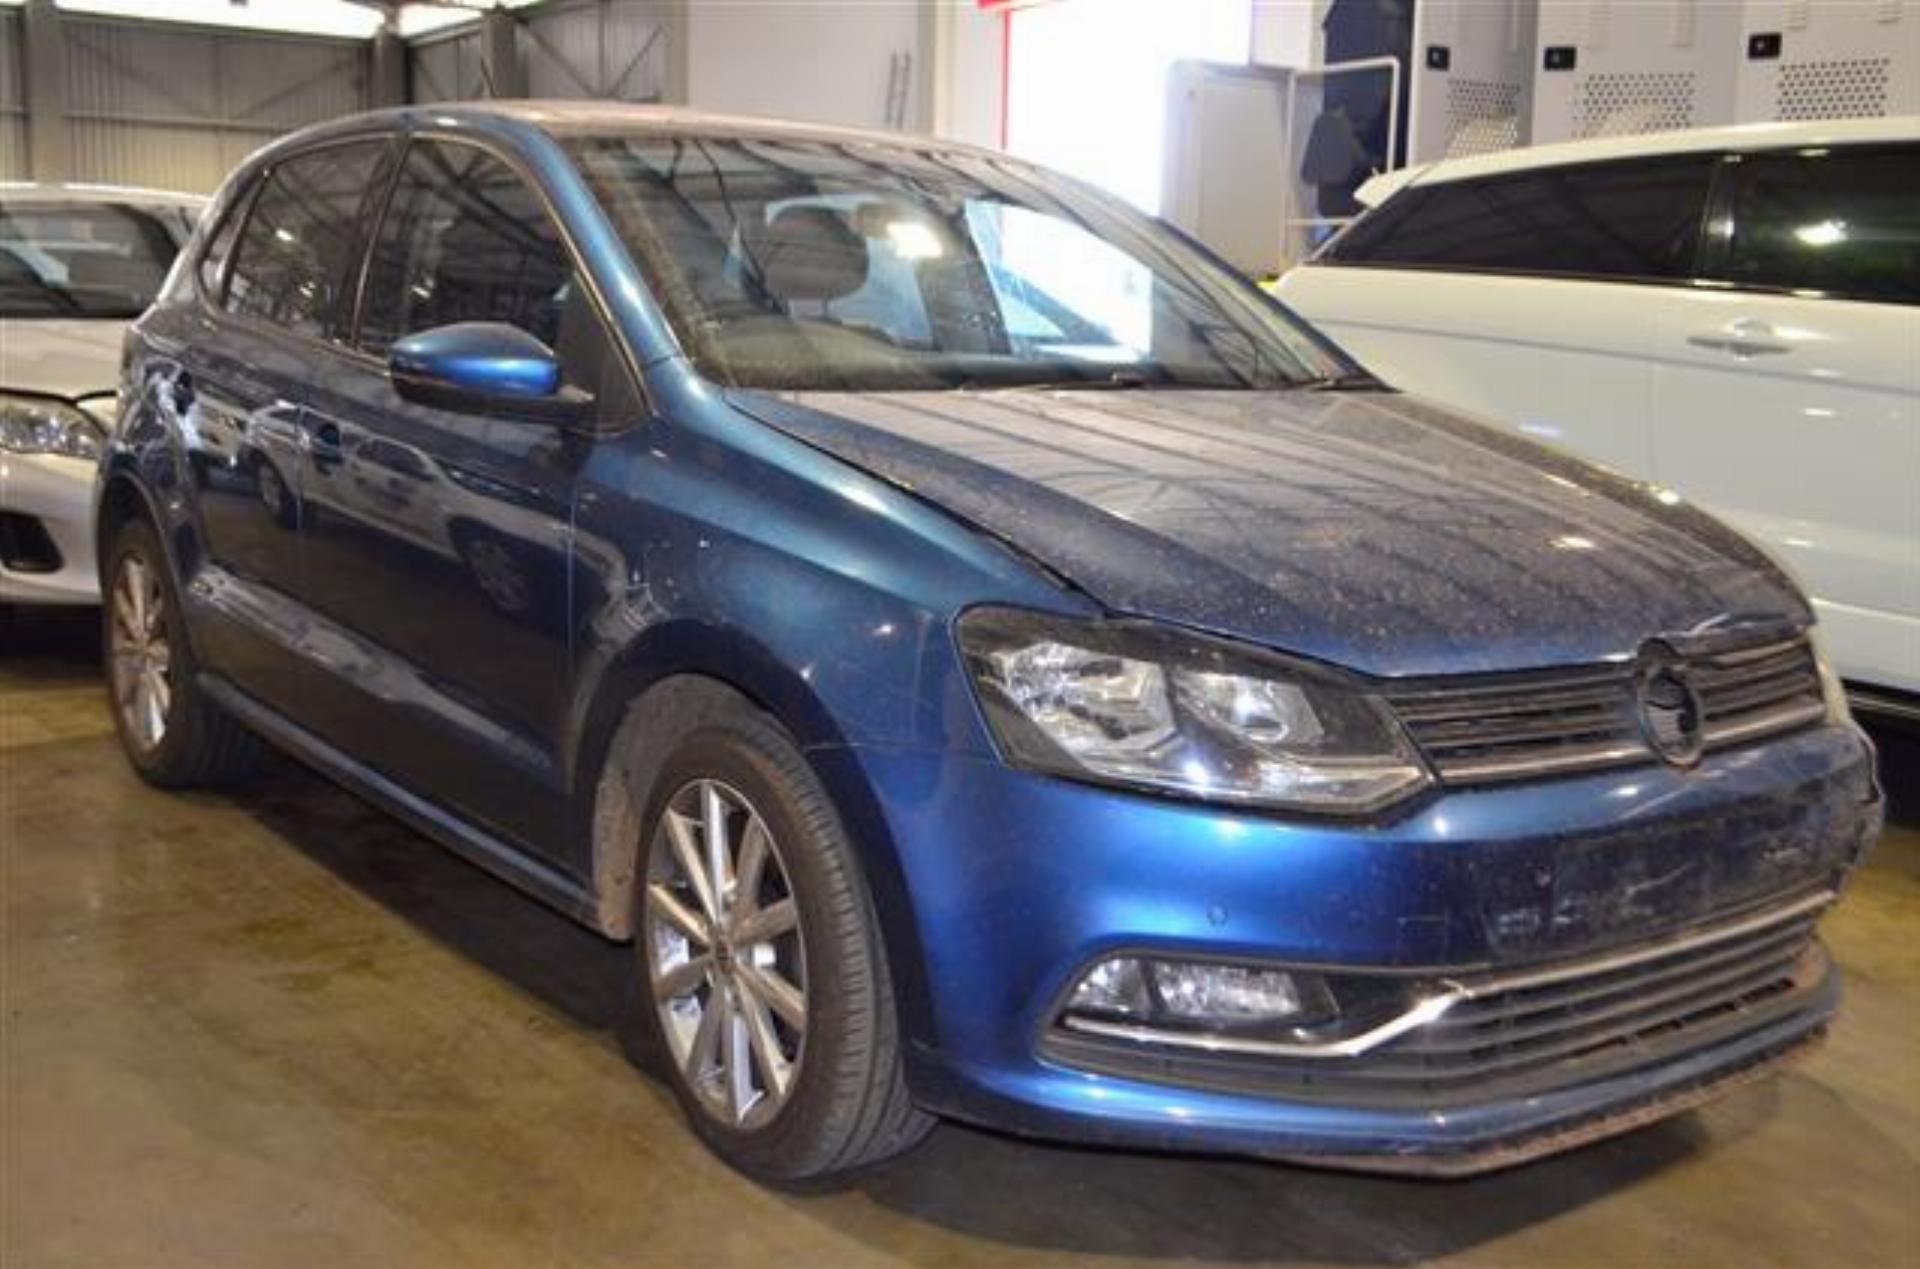 Repossessed Volkswagen Polo GP 1.2 Tsi 2014 on auction